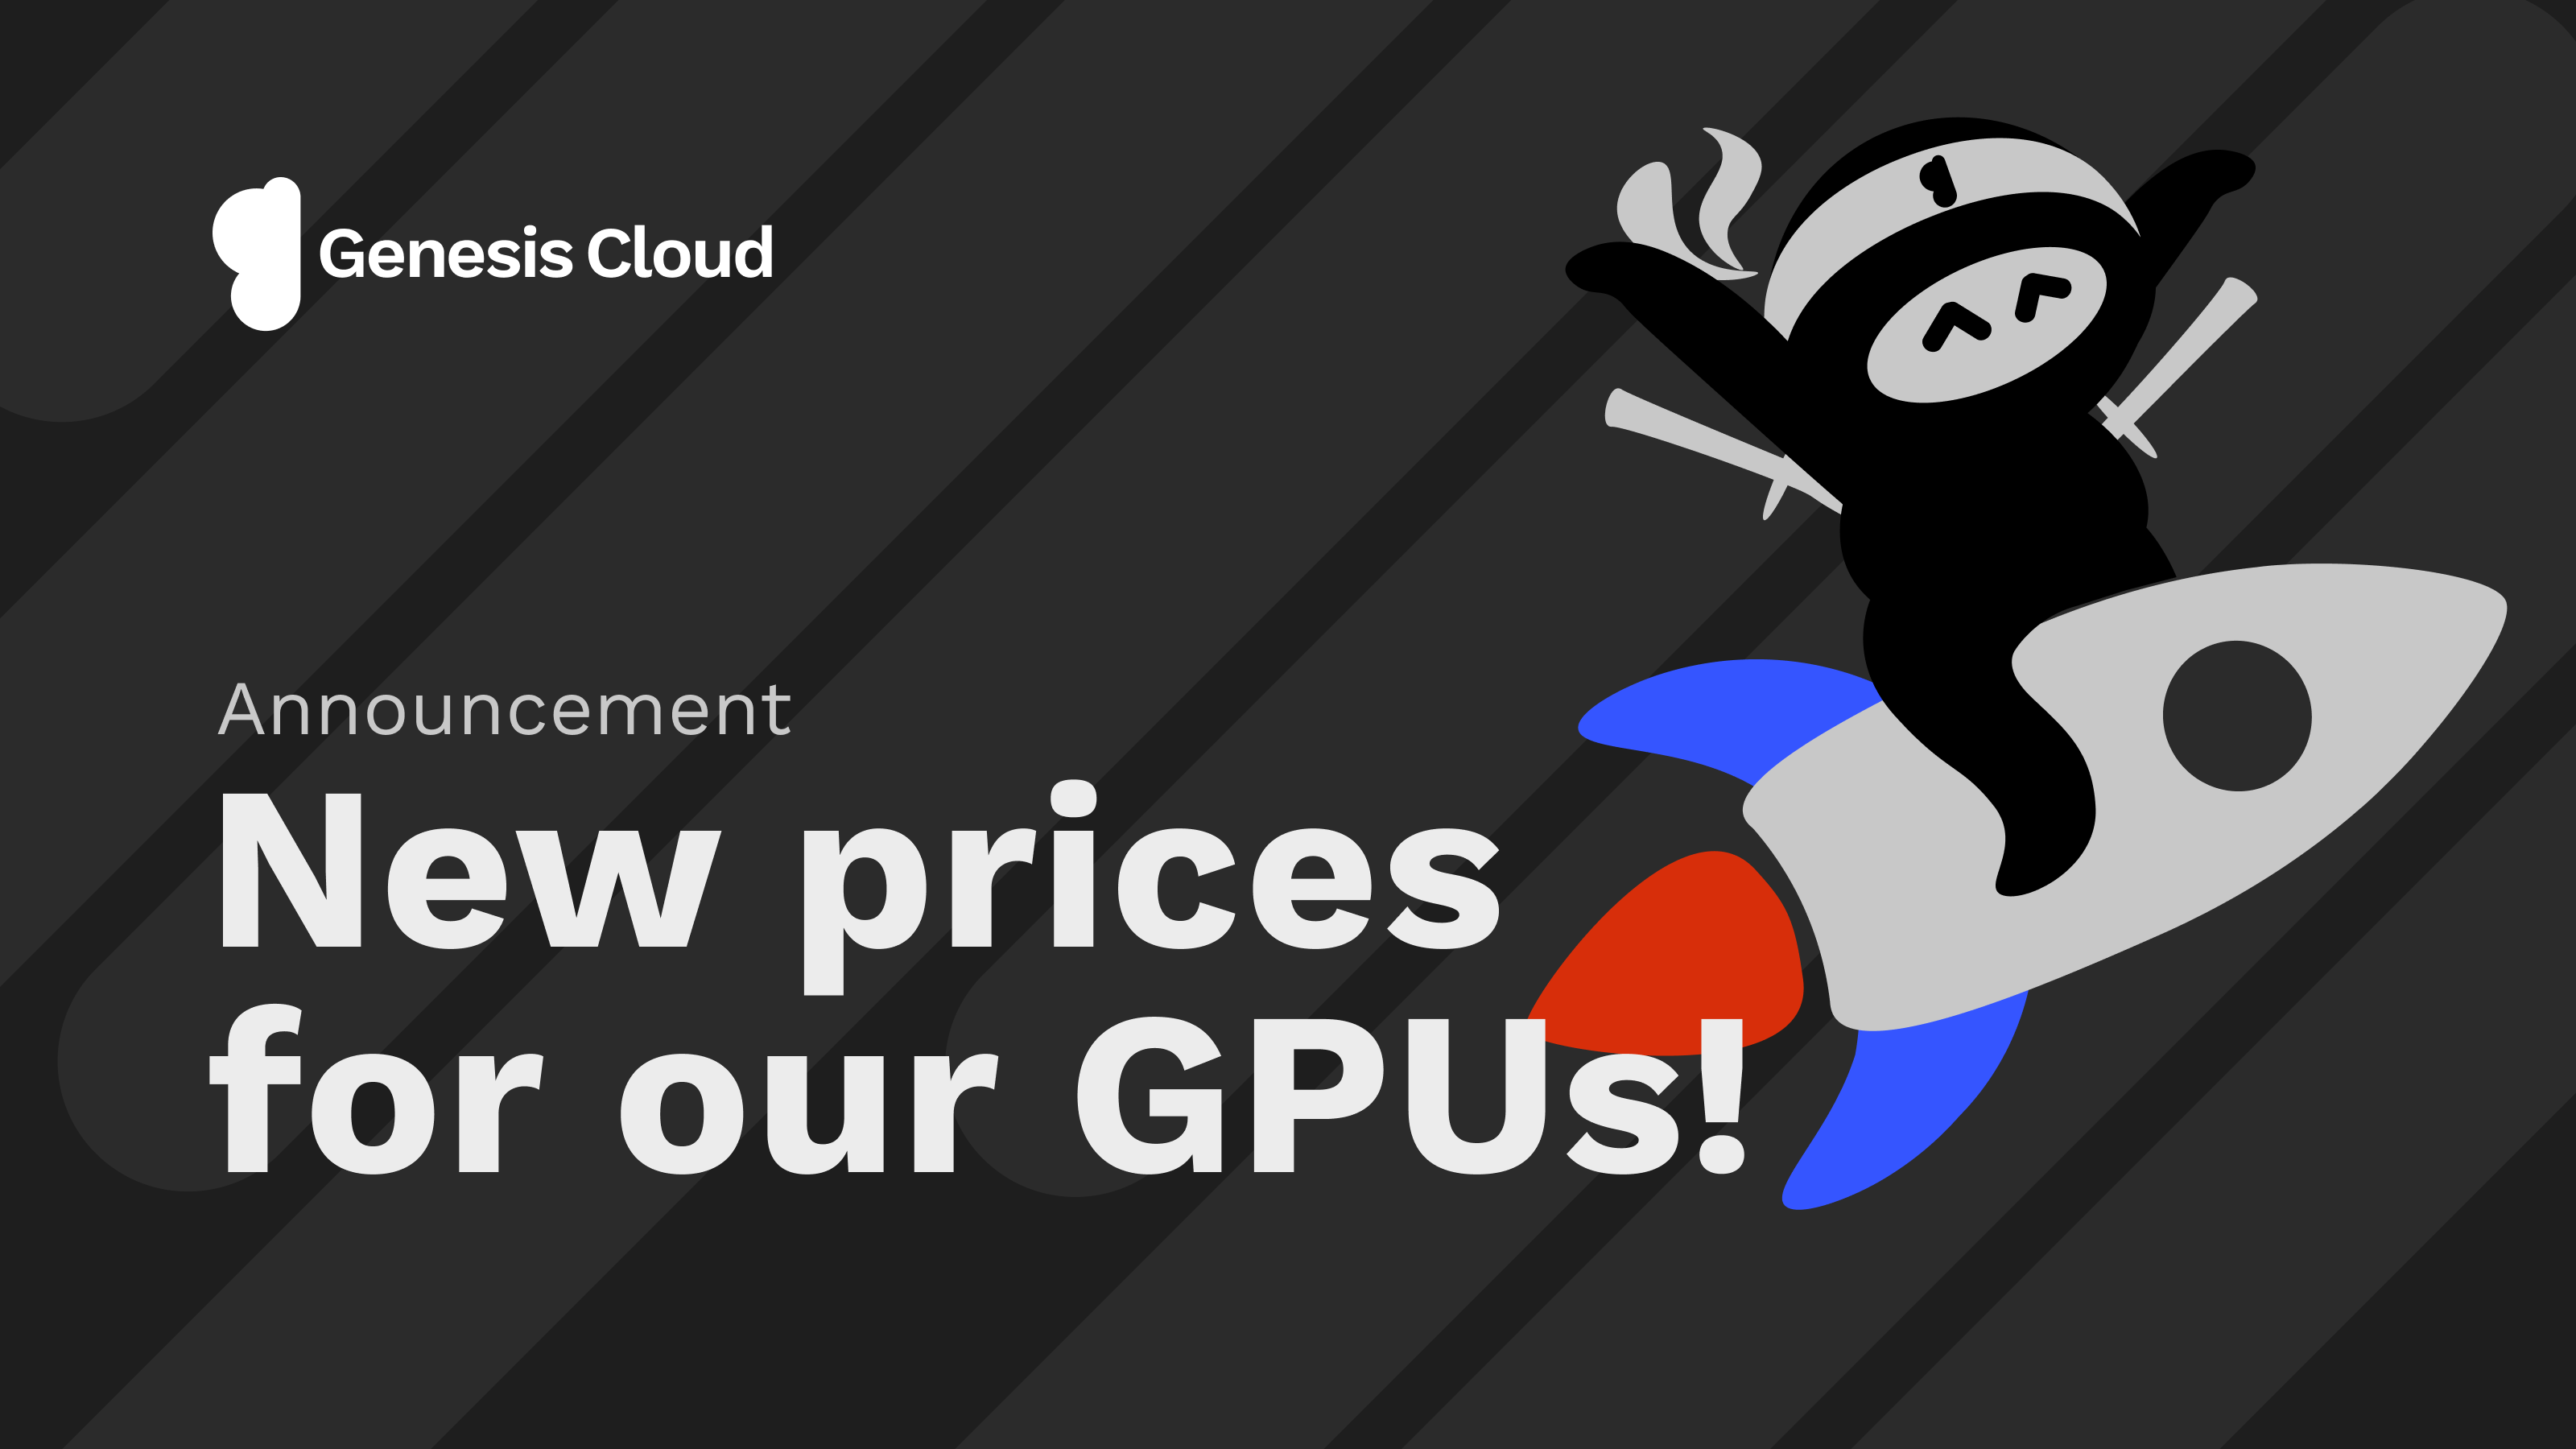 Price Reduction on our GPU instances - Get the best value for the lowest prices in the market!